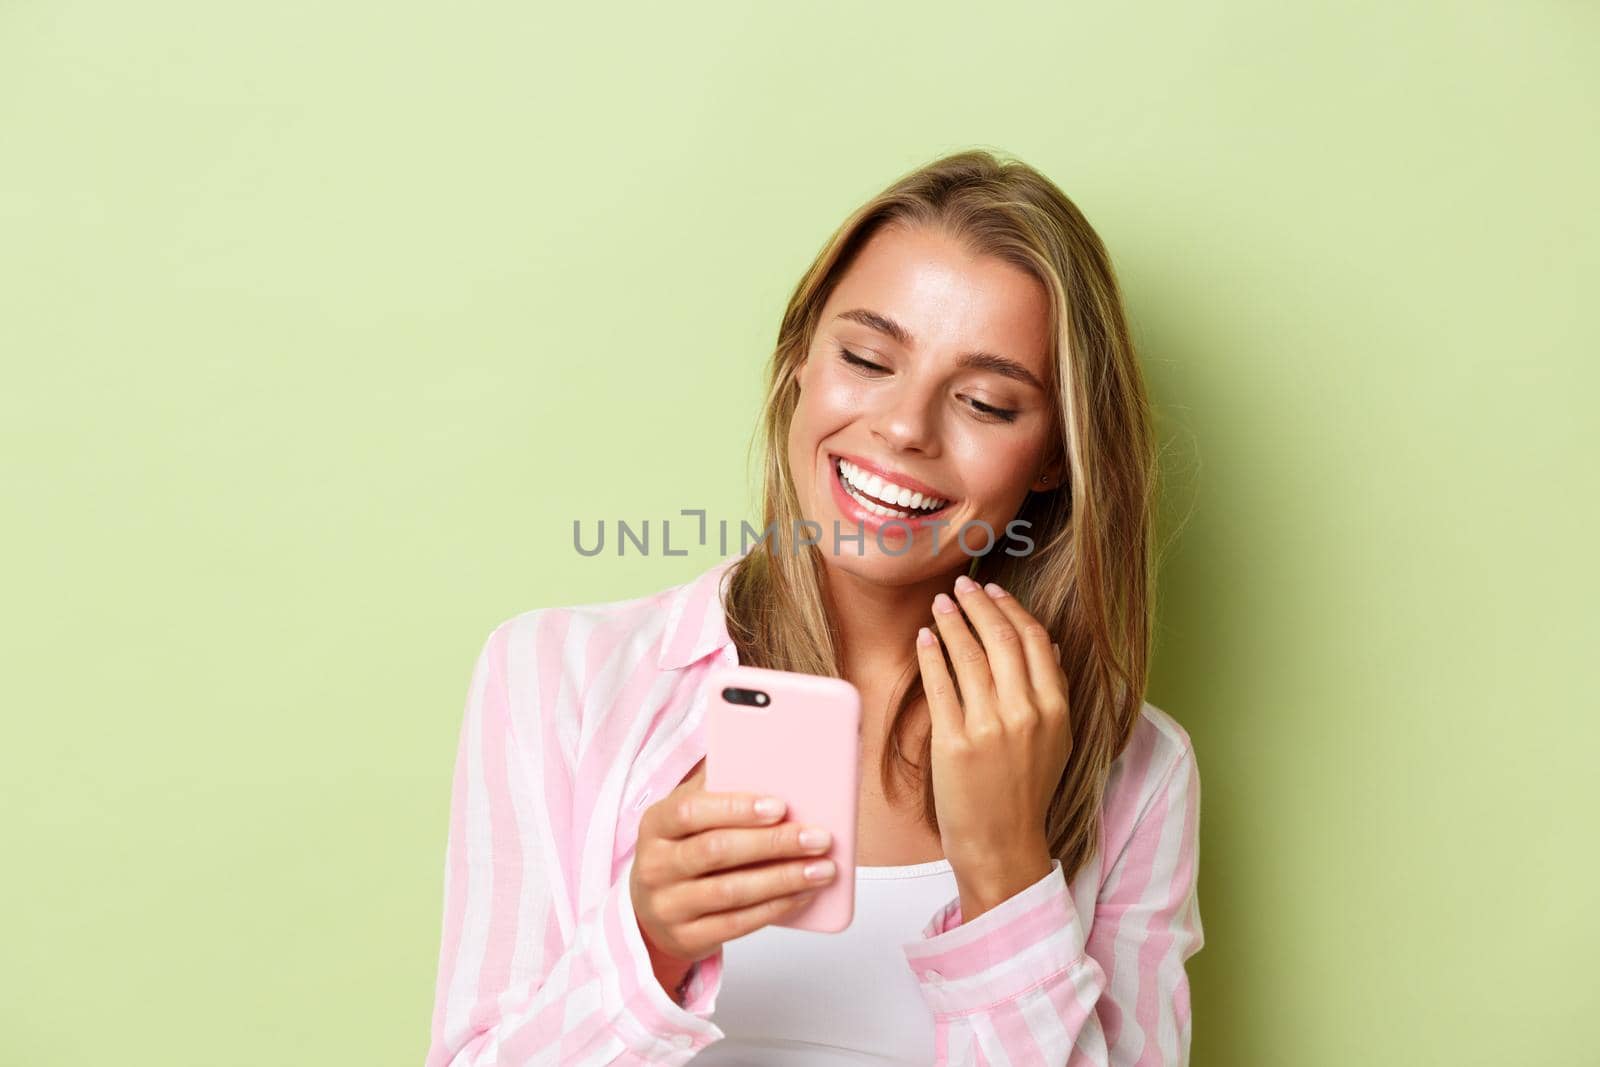 Close-up of attractive blond girl in pink shirt, messaging on phone, smiling and looking at smartphone, standing over green background.